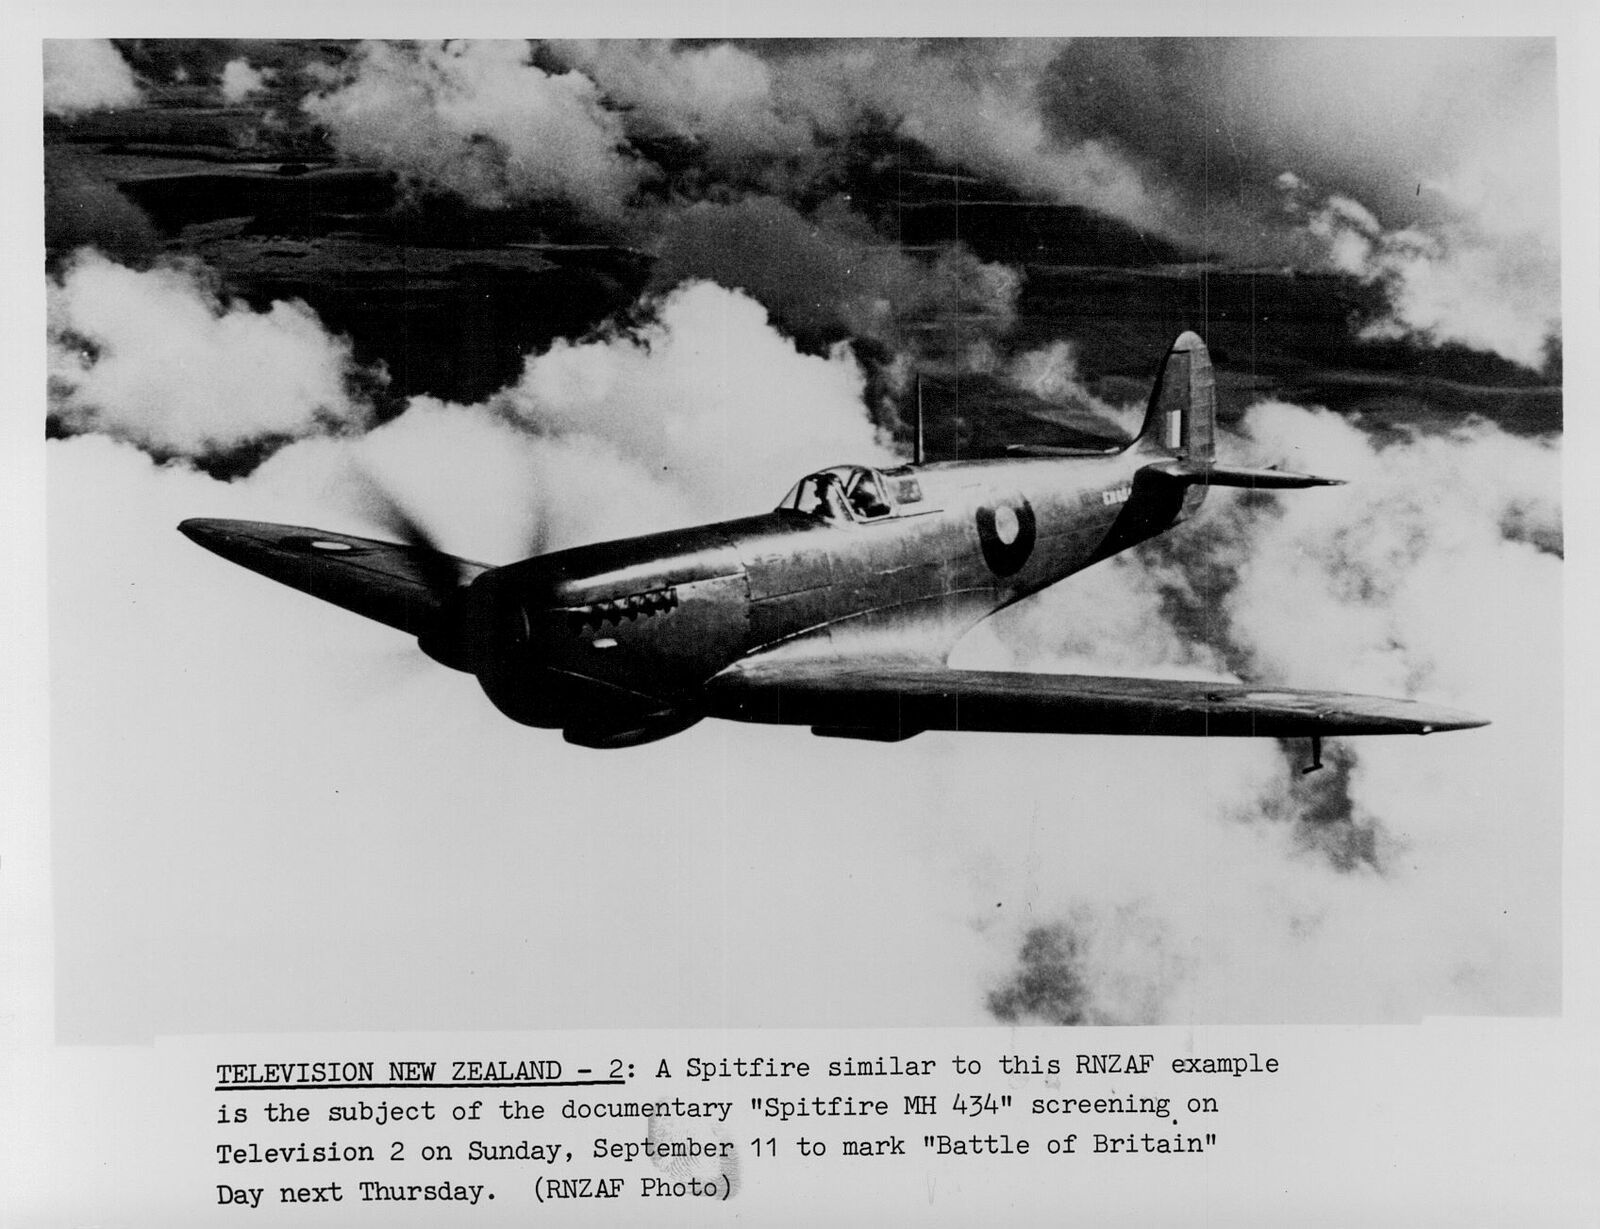 Spitfire MH 434 Aircraft in Flight Press Photo